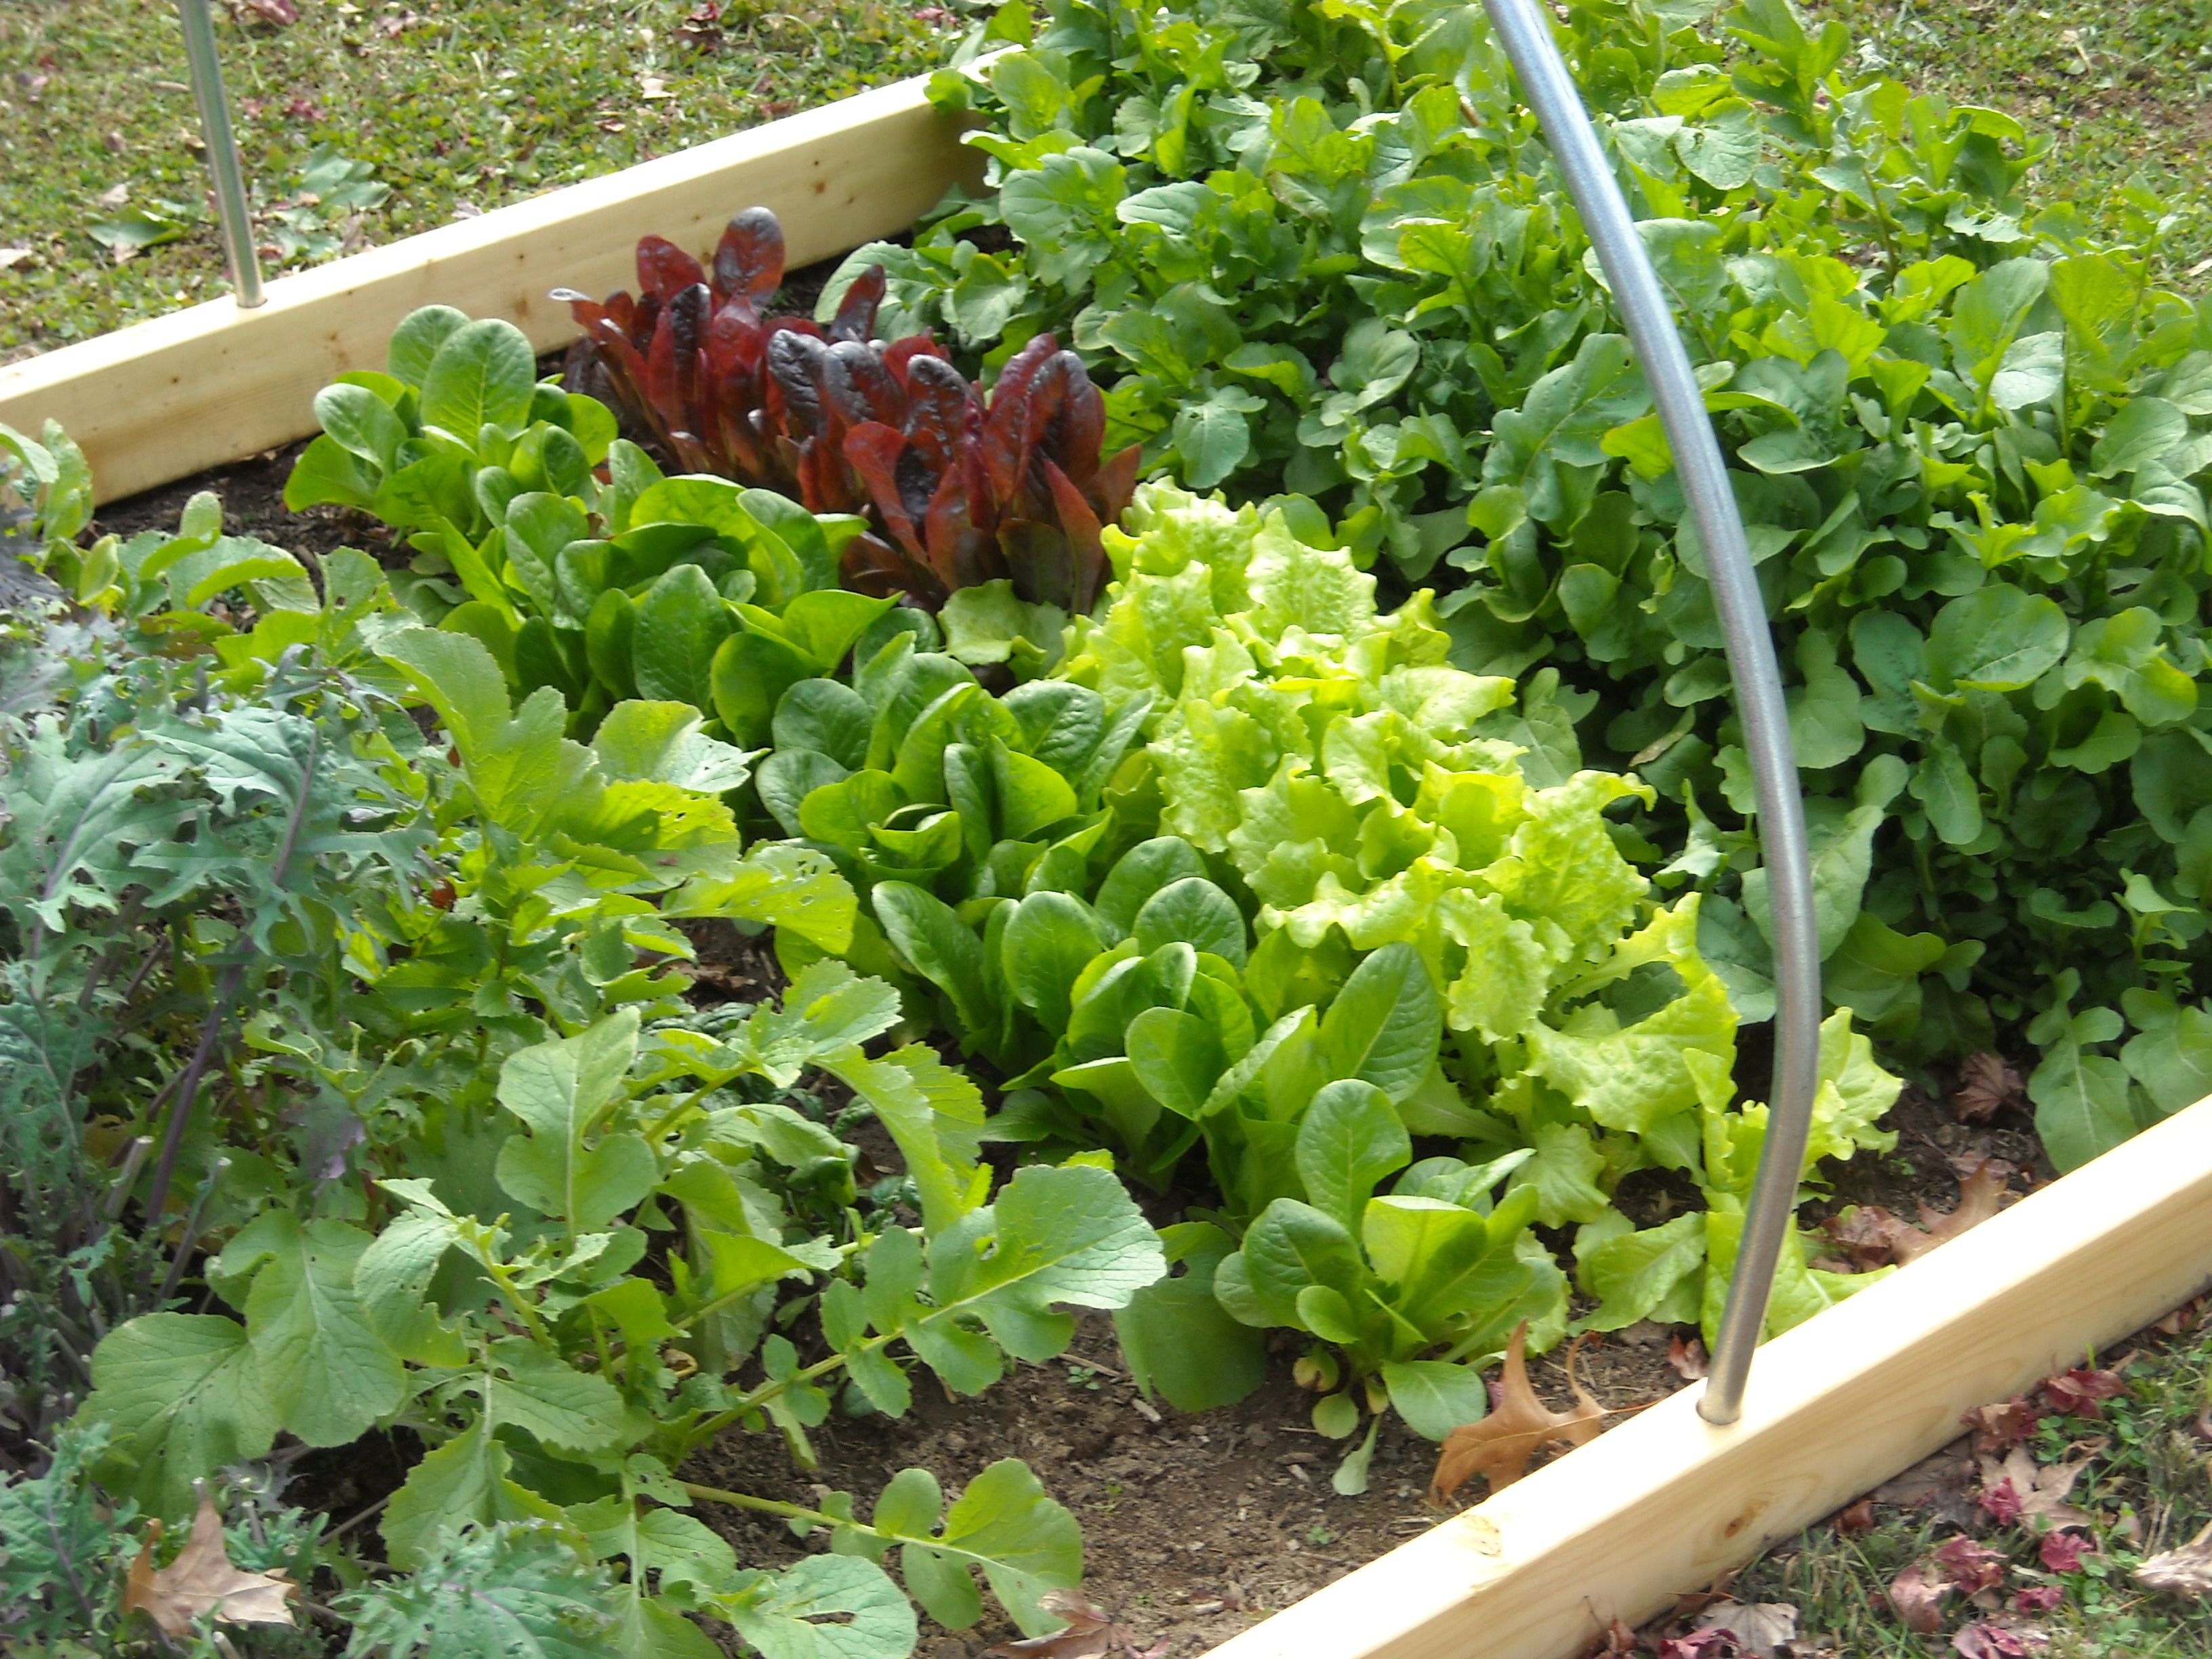 Image of leafy vegetable plants in a garden bed that will be covered for winter.